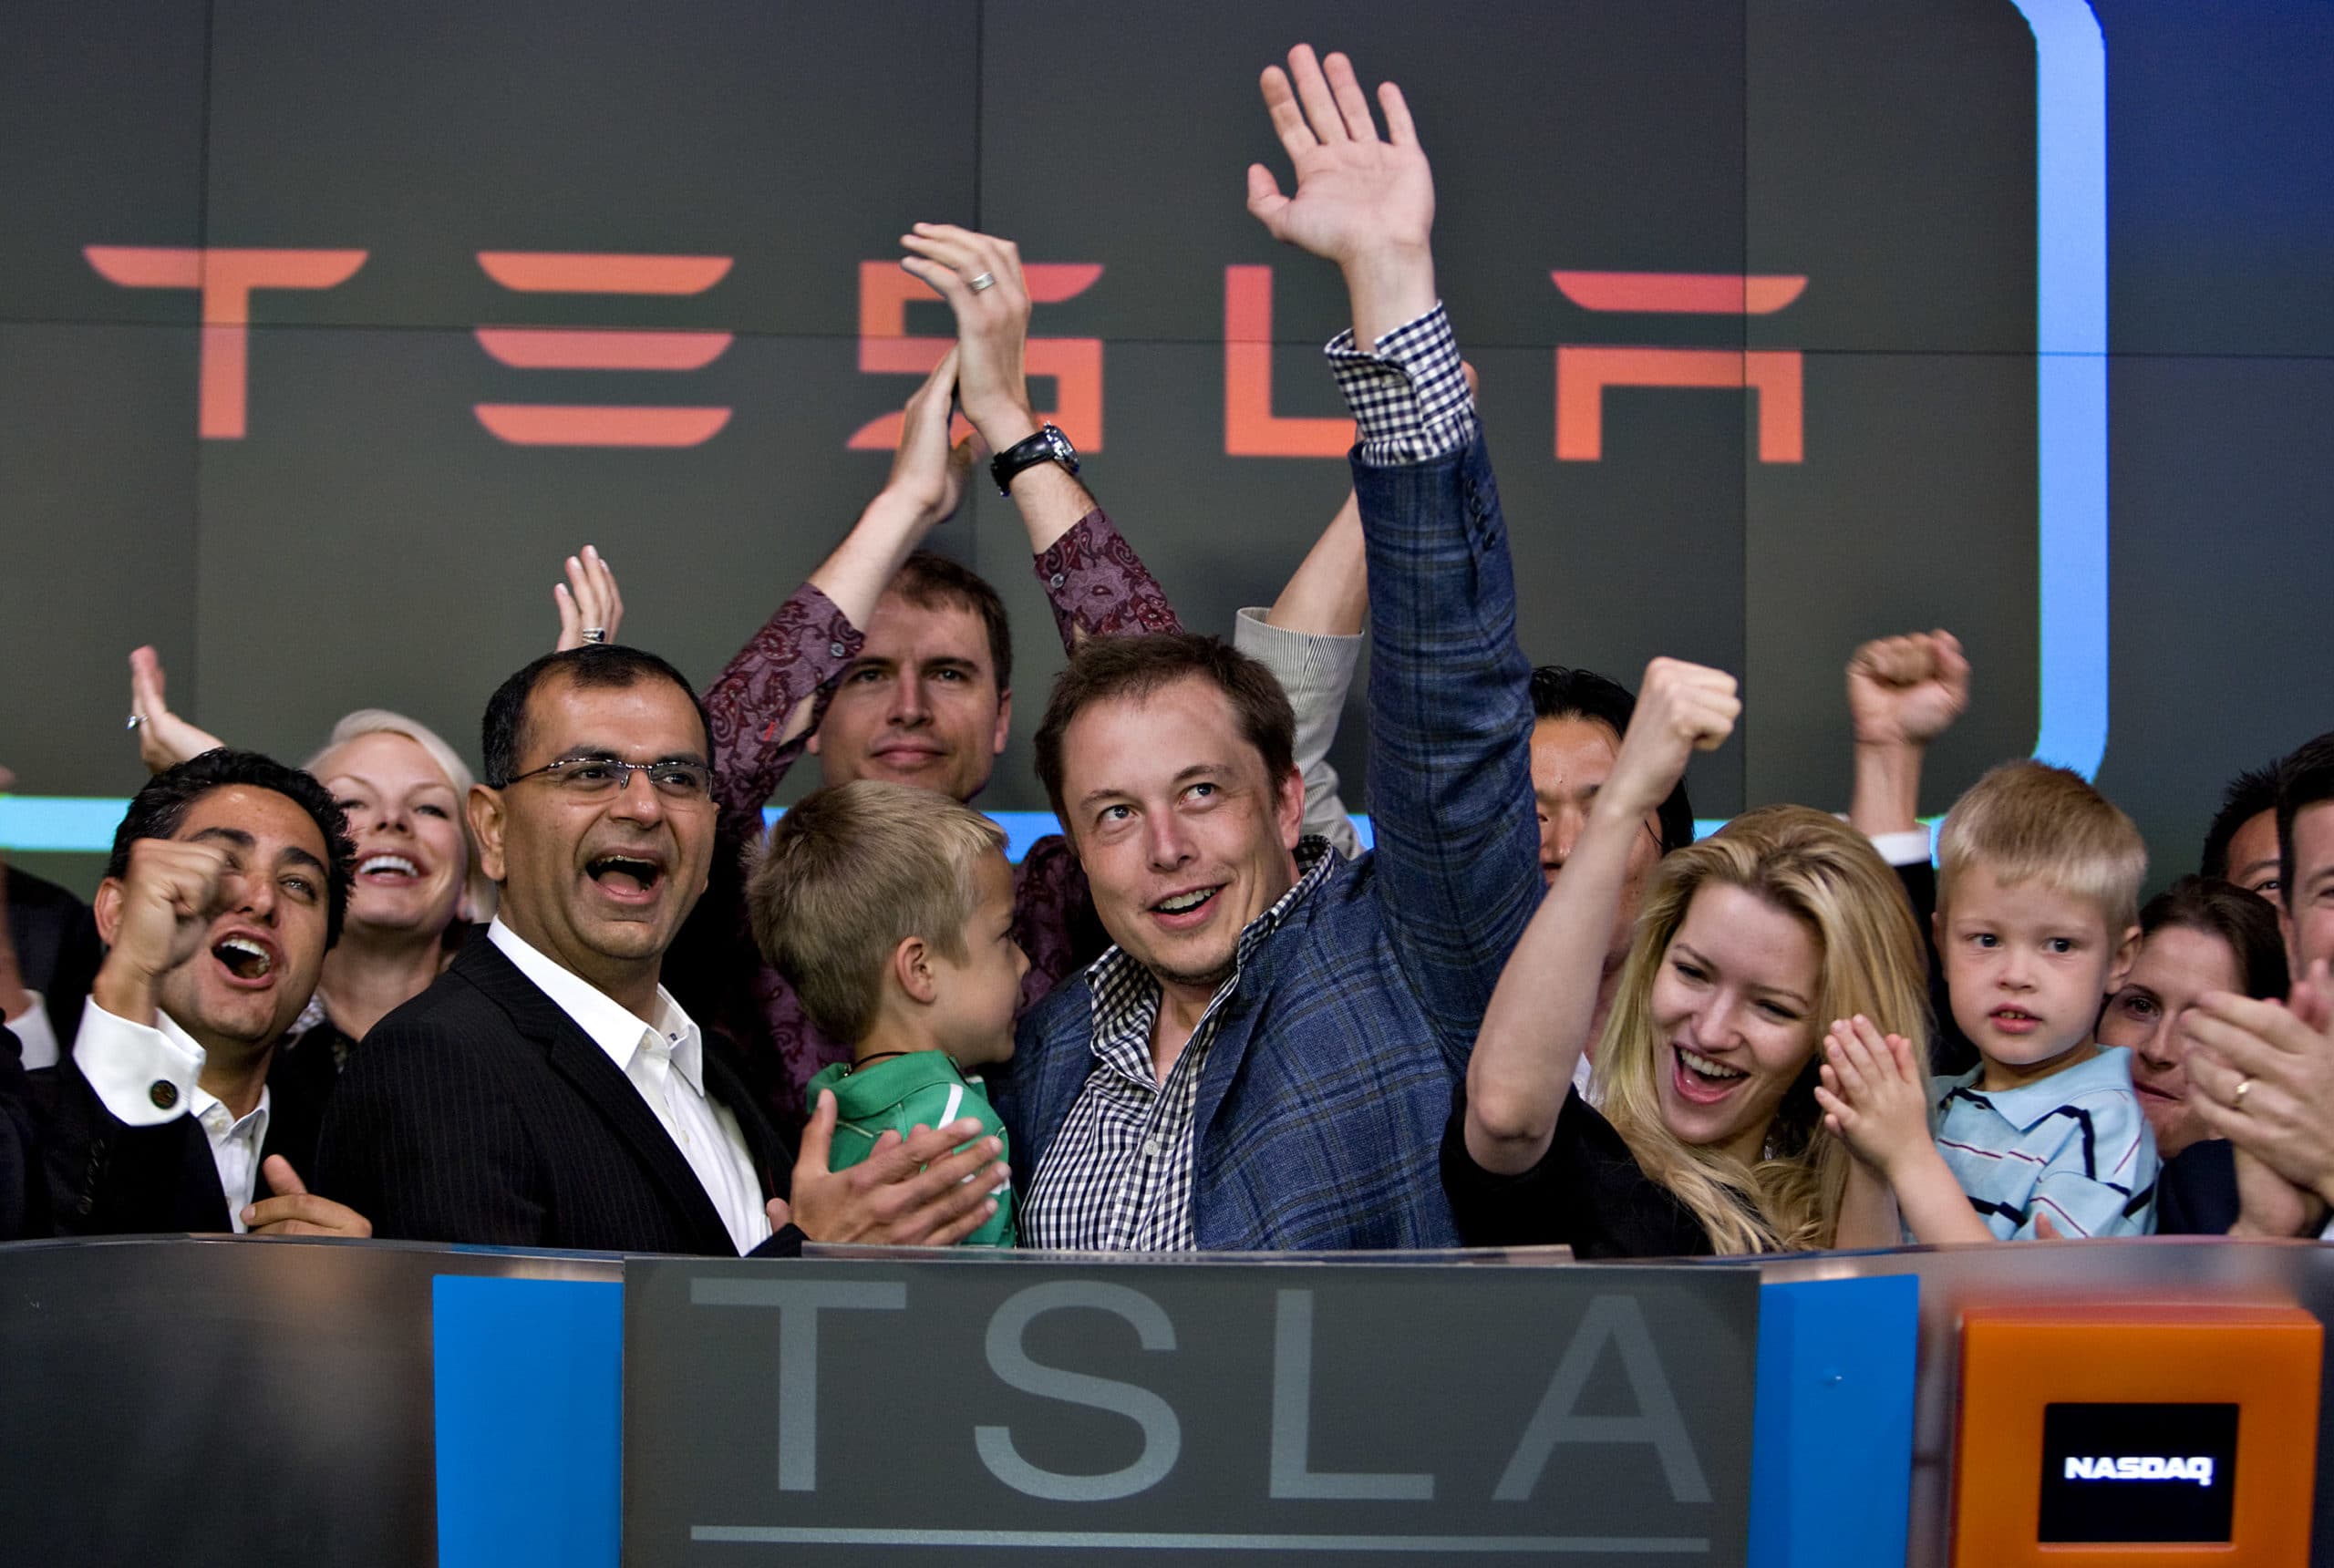 Elon Musk Betting On Tesla IPO To Fund Electric Car Maker